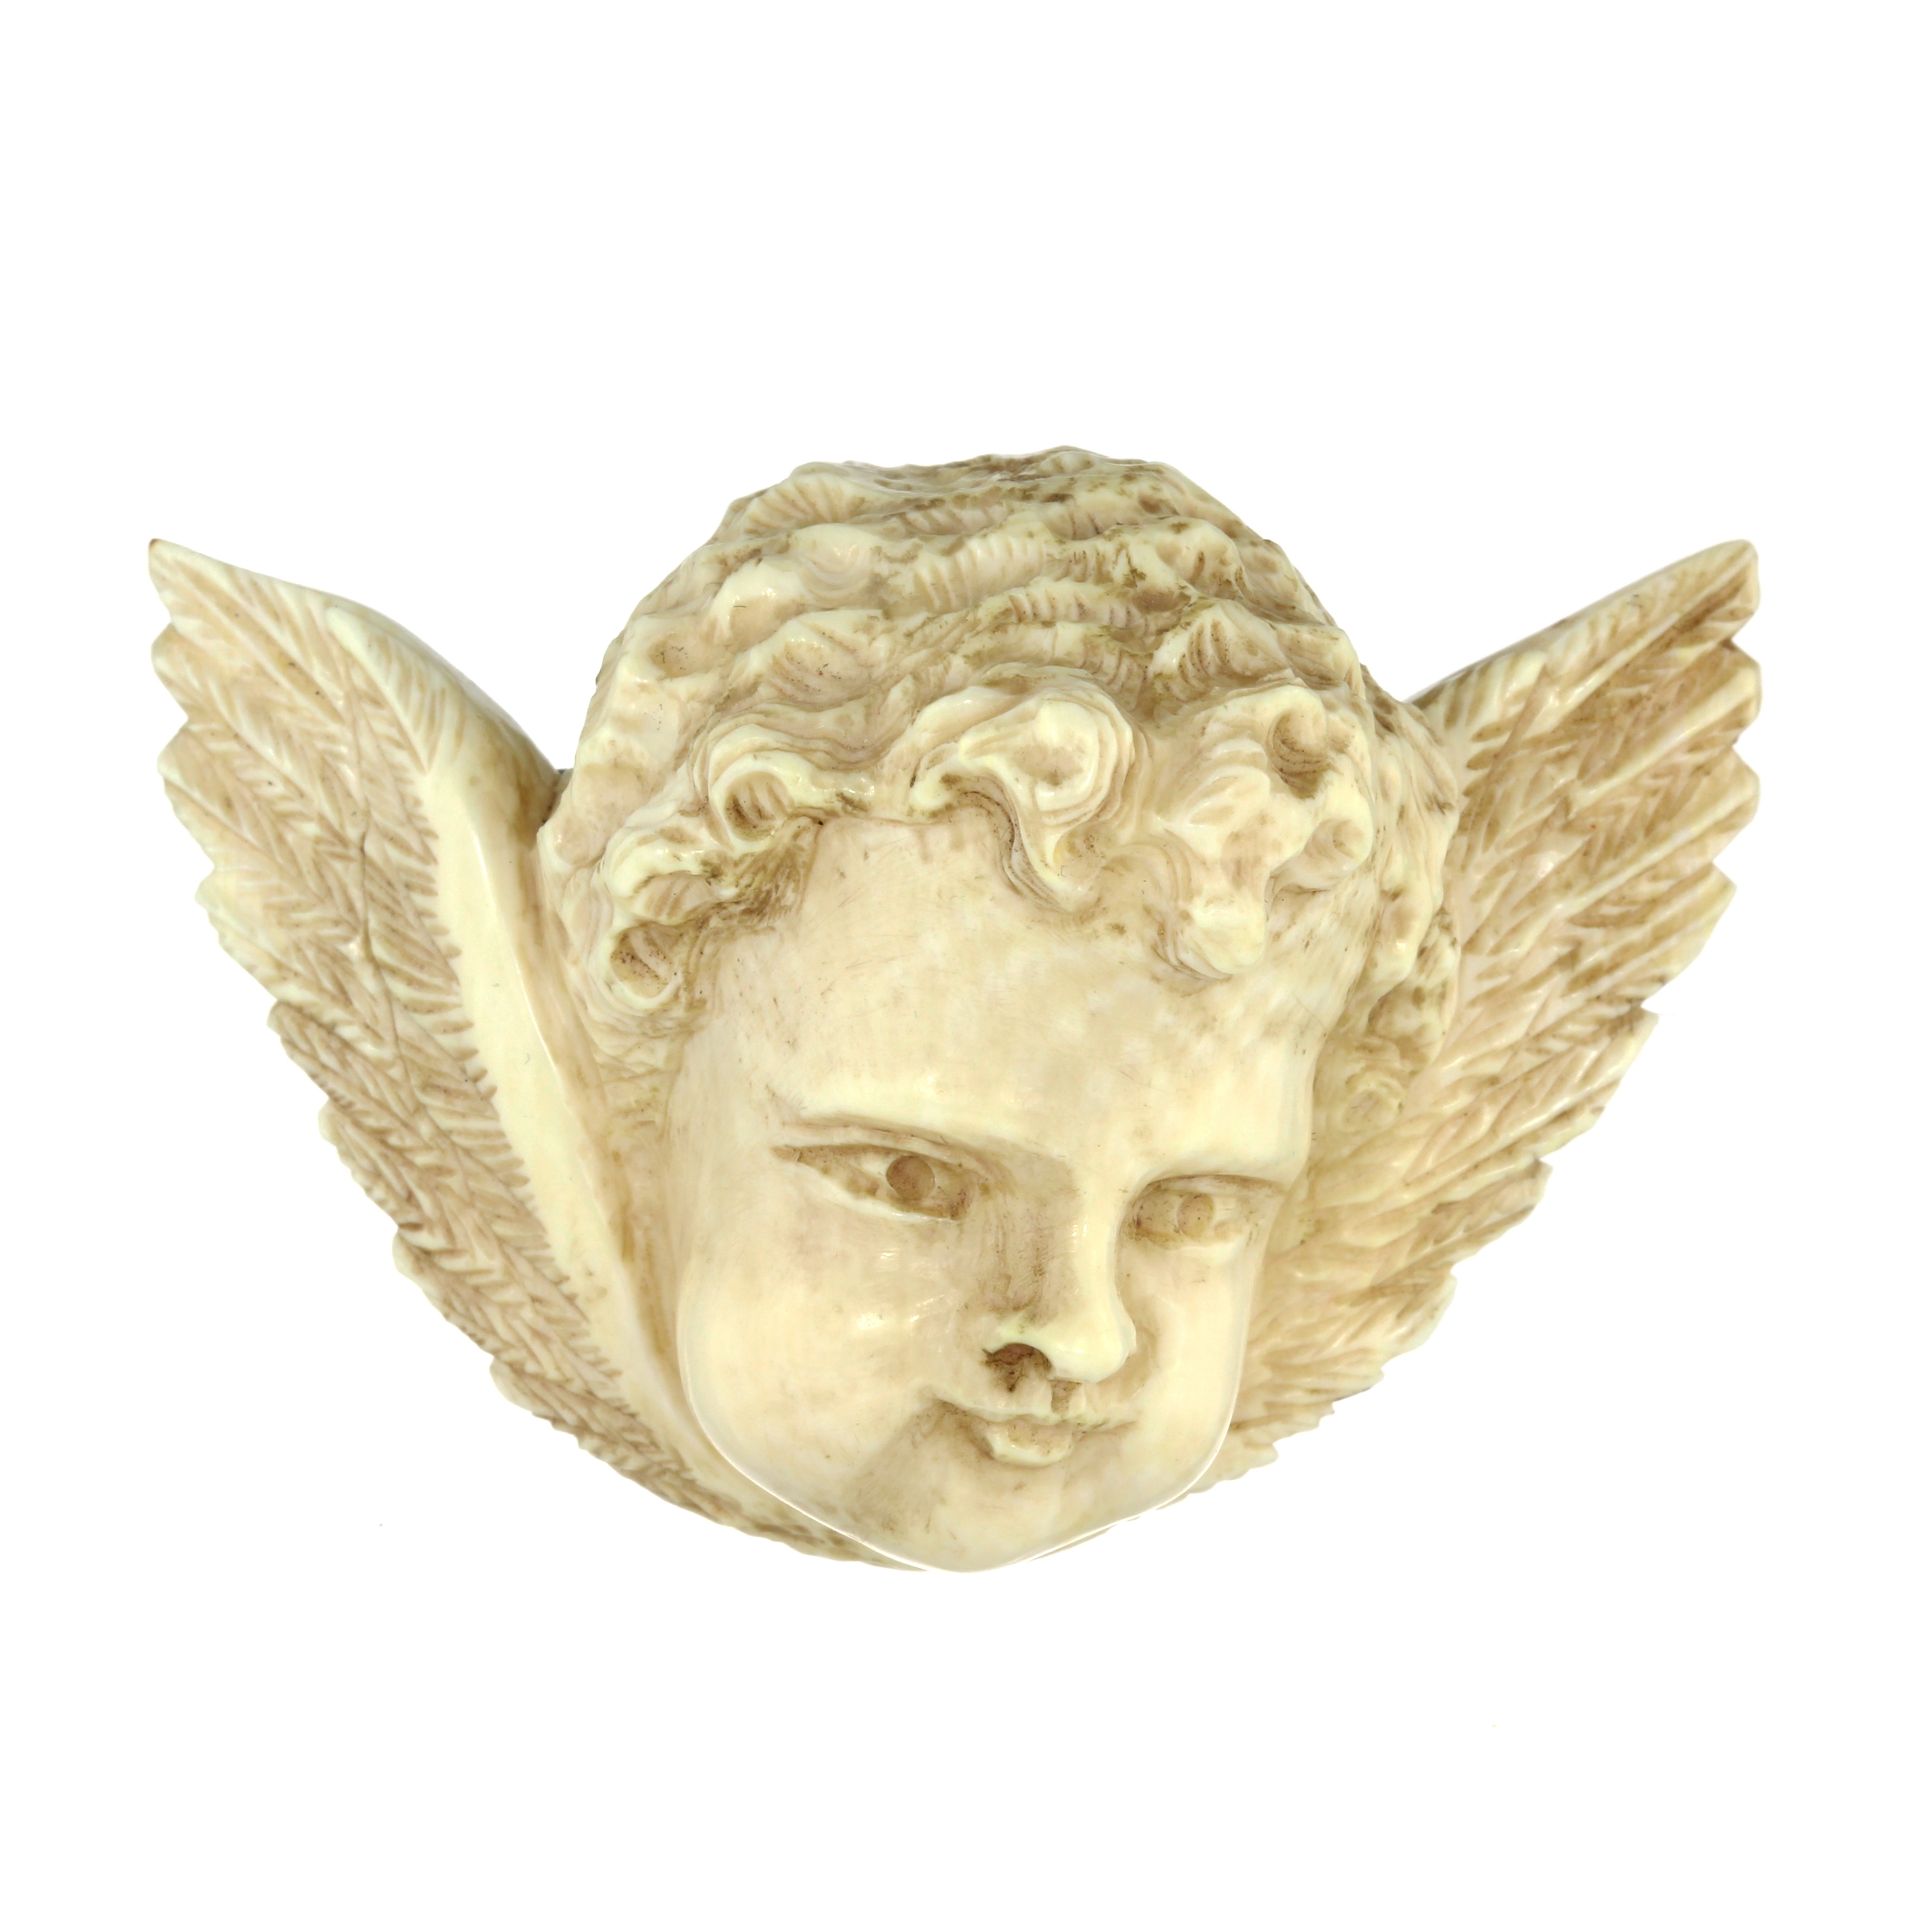 AN ANTIQUE CARVED IVORY CHERUB BROOCH, LATE 19TH CENTURY carved in detail to depict the head of a